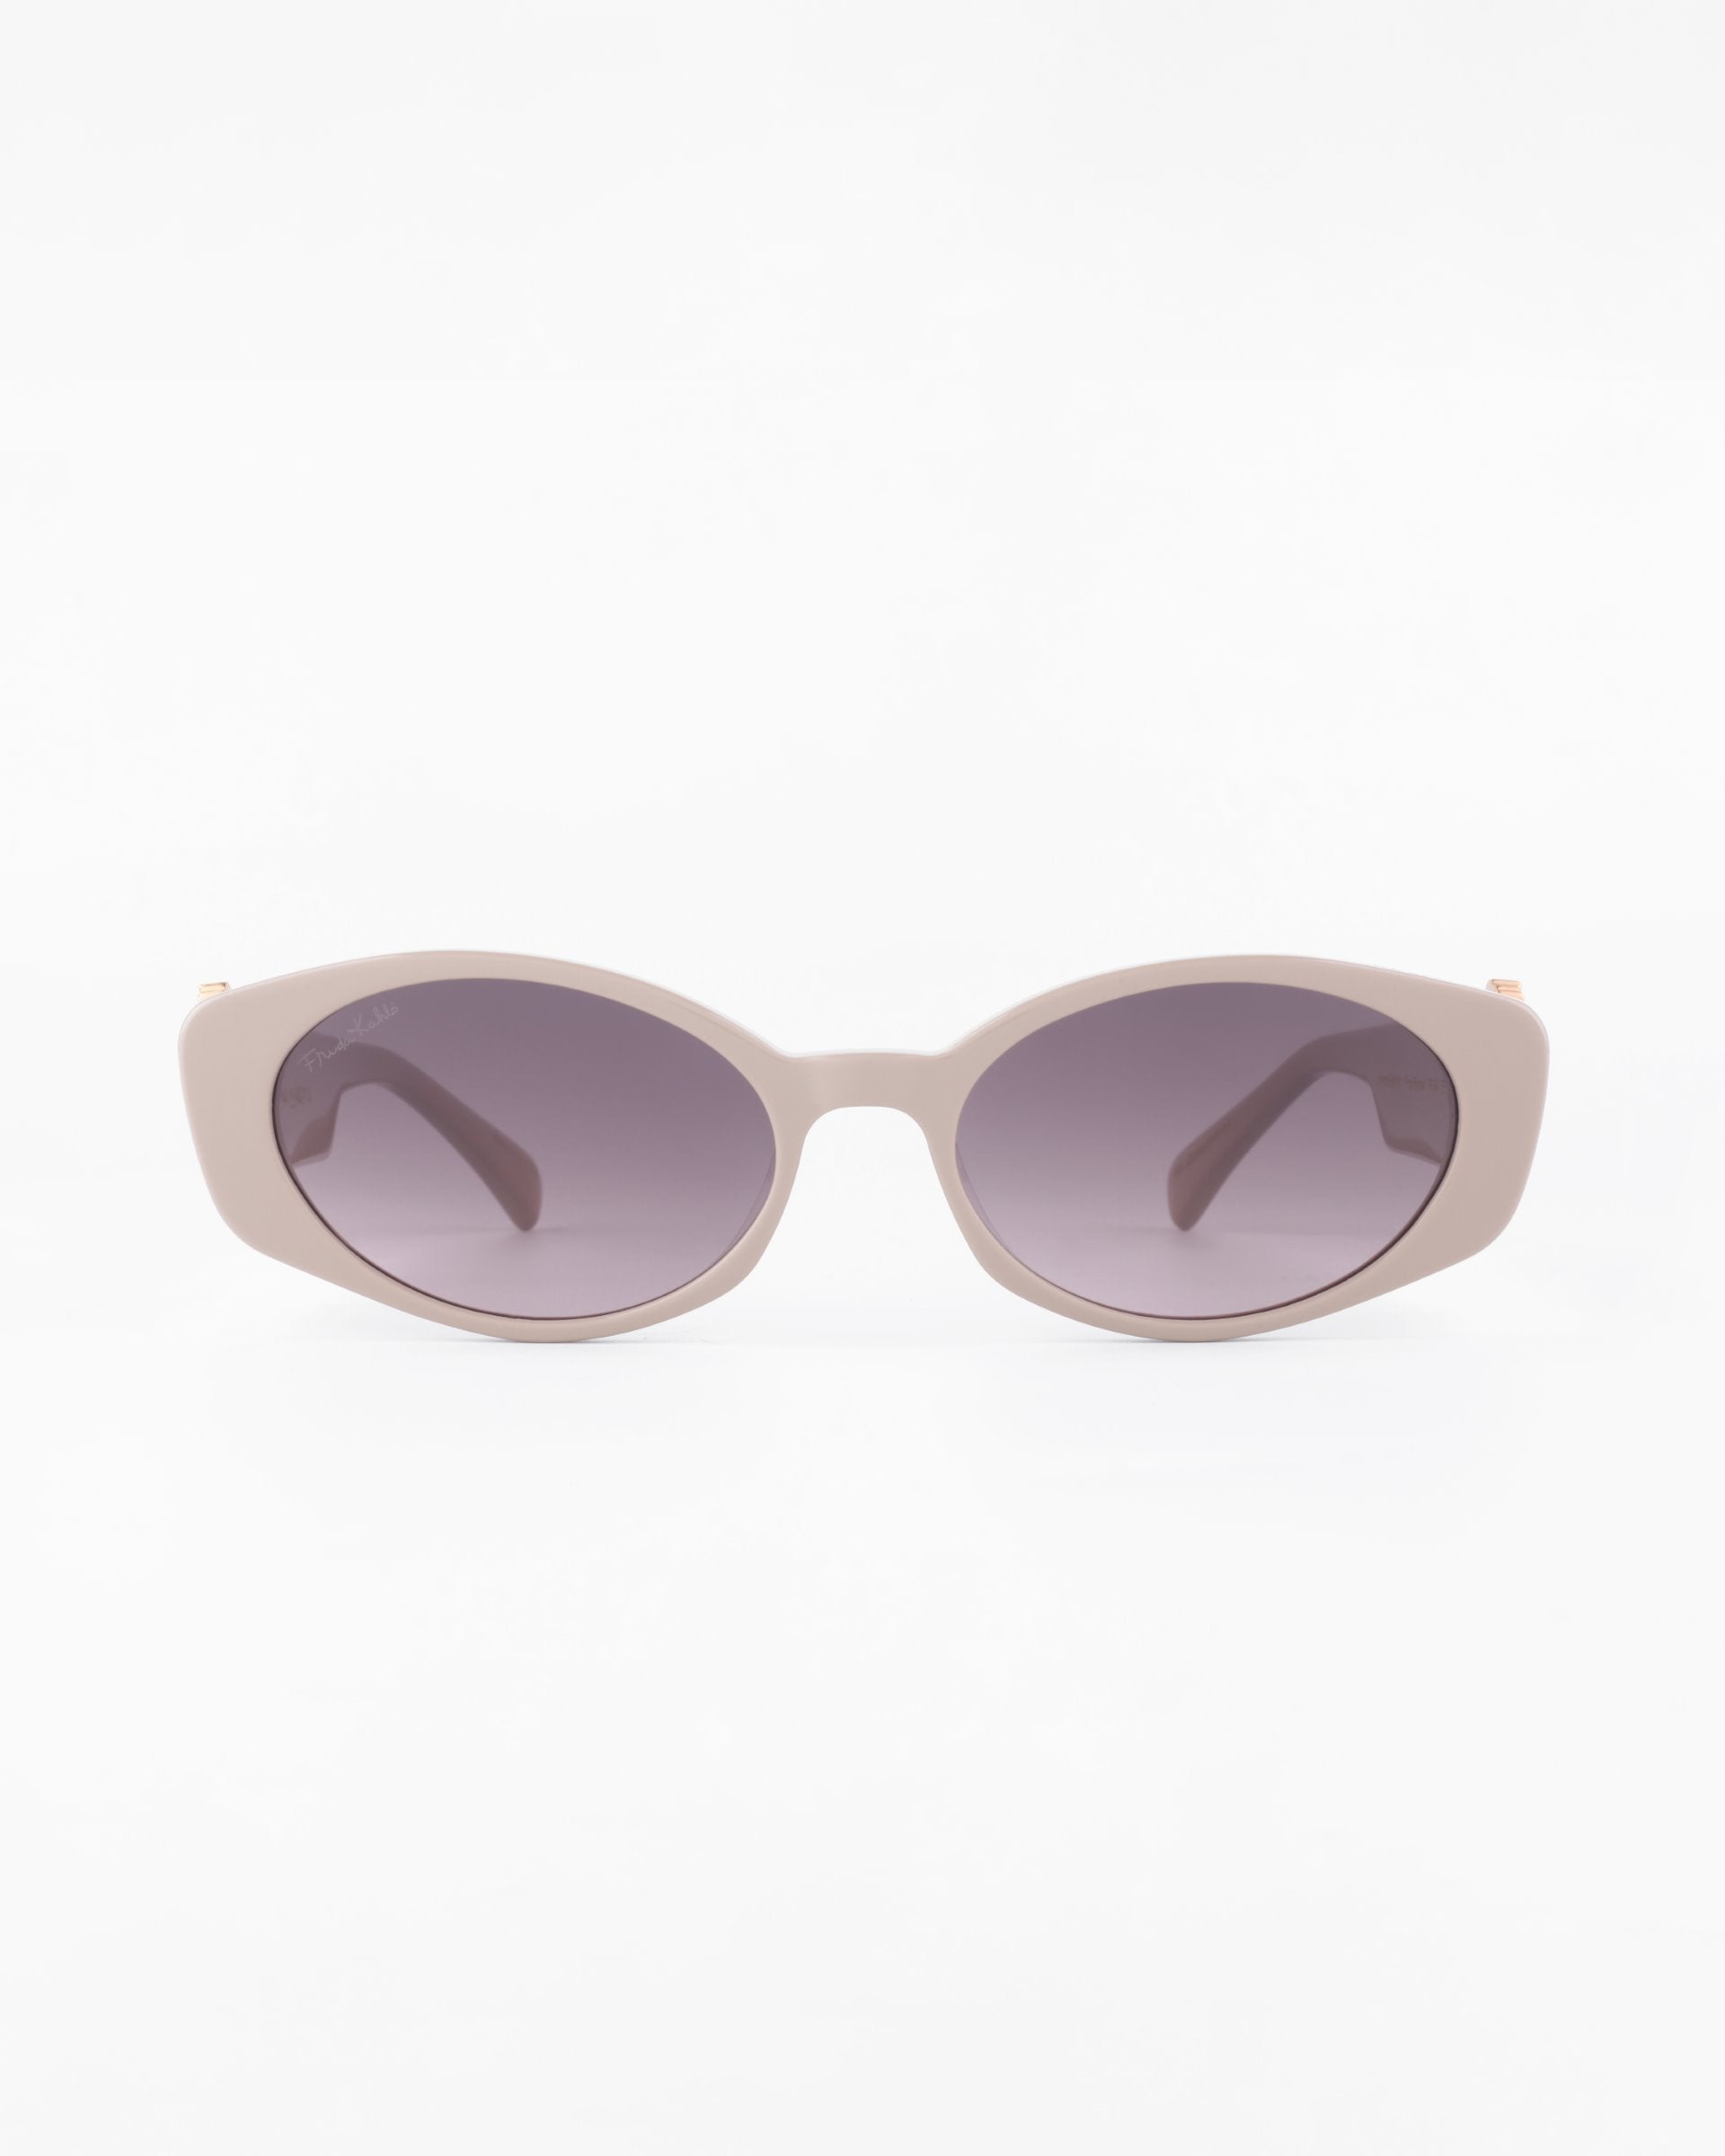 A pair of Frida Portrait sunglasses by For Art's Sake® with large, round, ultra-lightweight nylon lenses tinted in a gradient from dark to light gray. The sunglasses offer 100% UVA & UVB protection and are positioned facing forward against a plain white background.